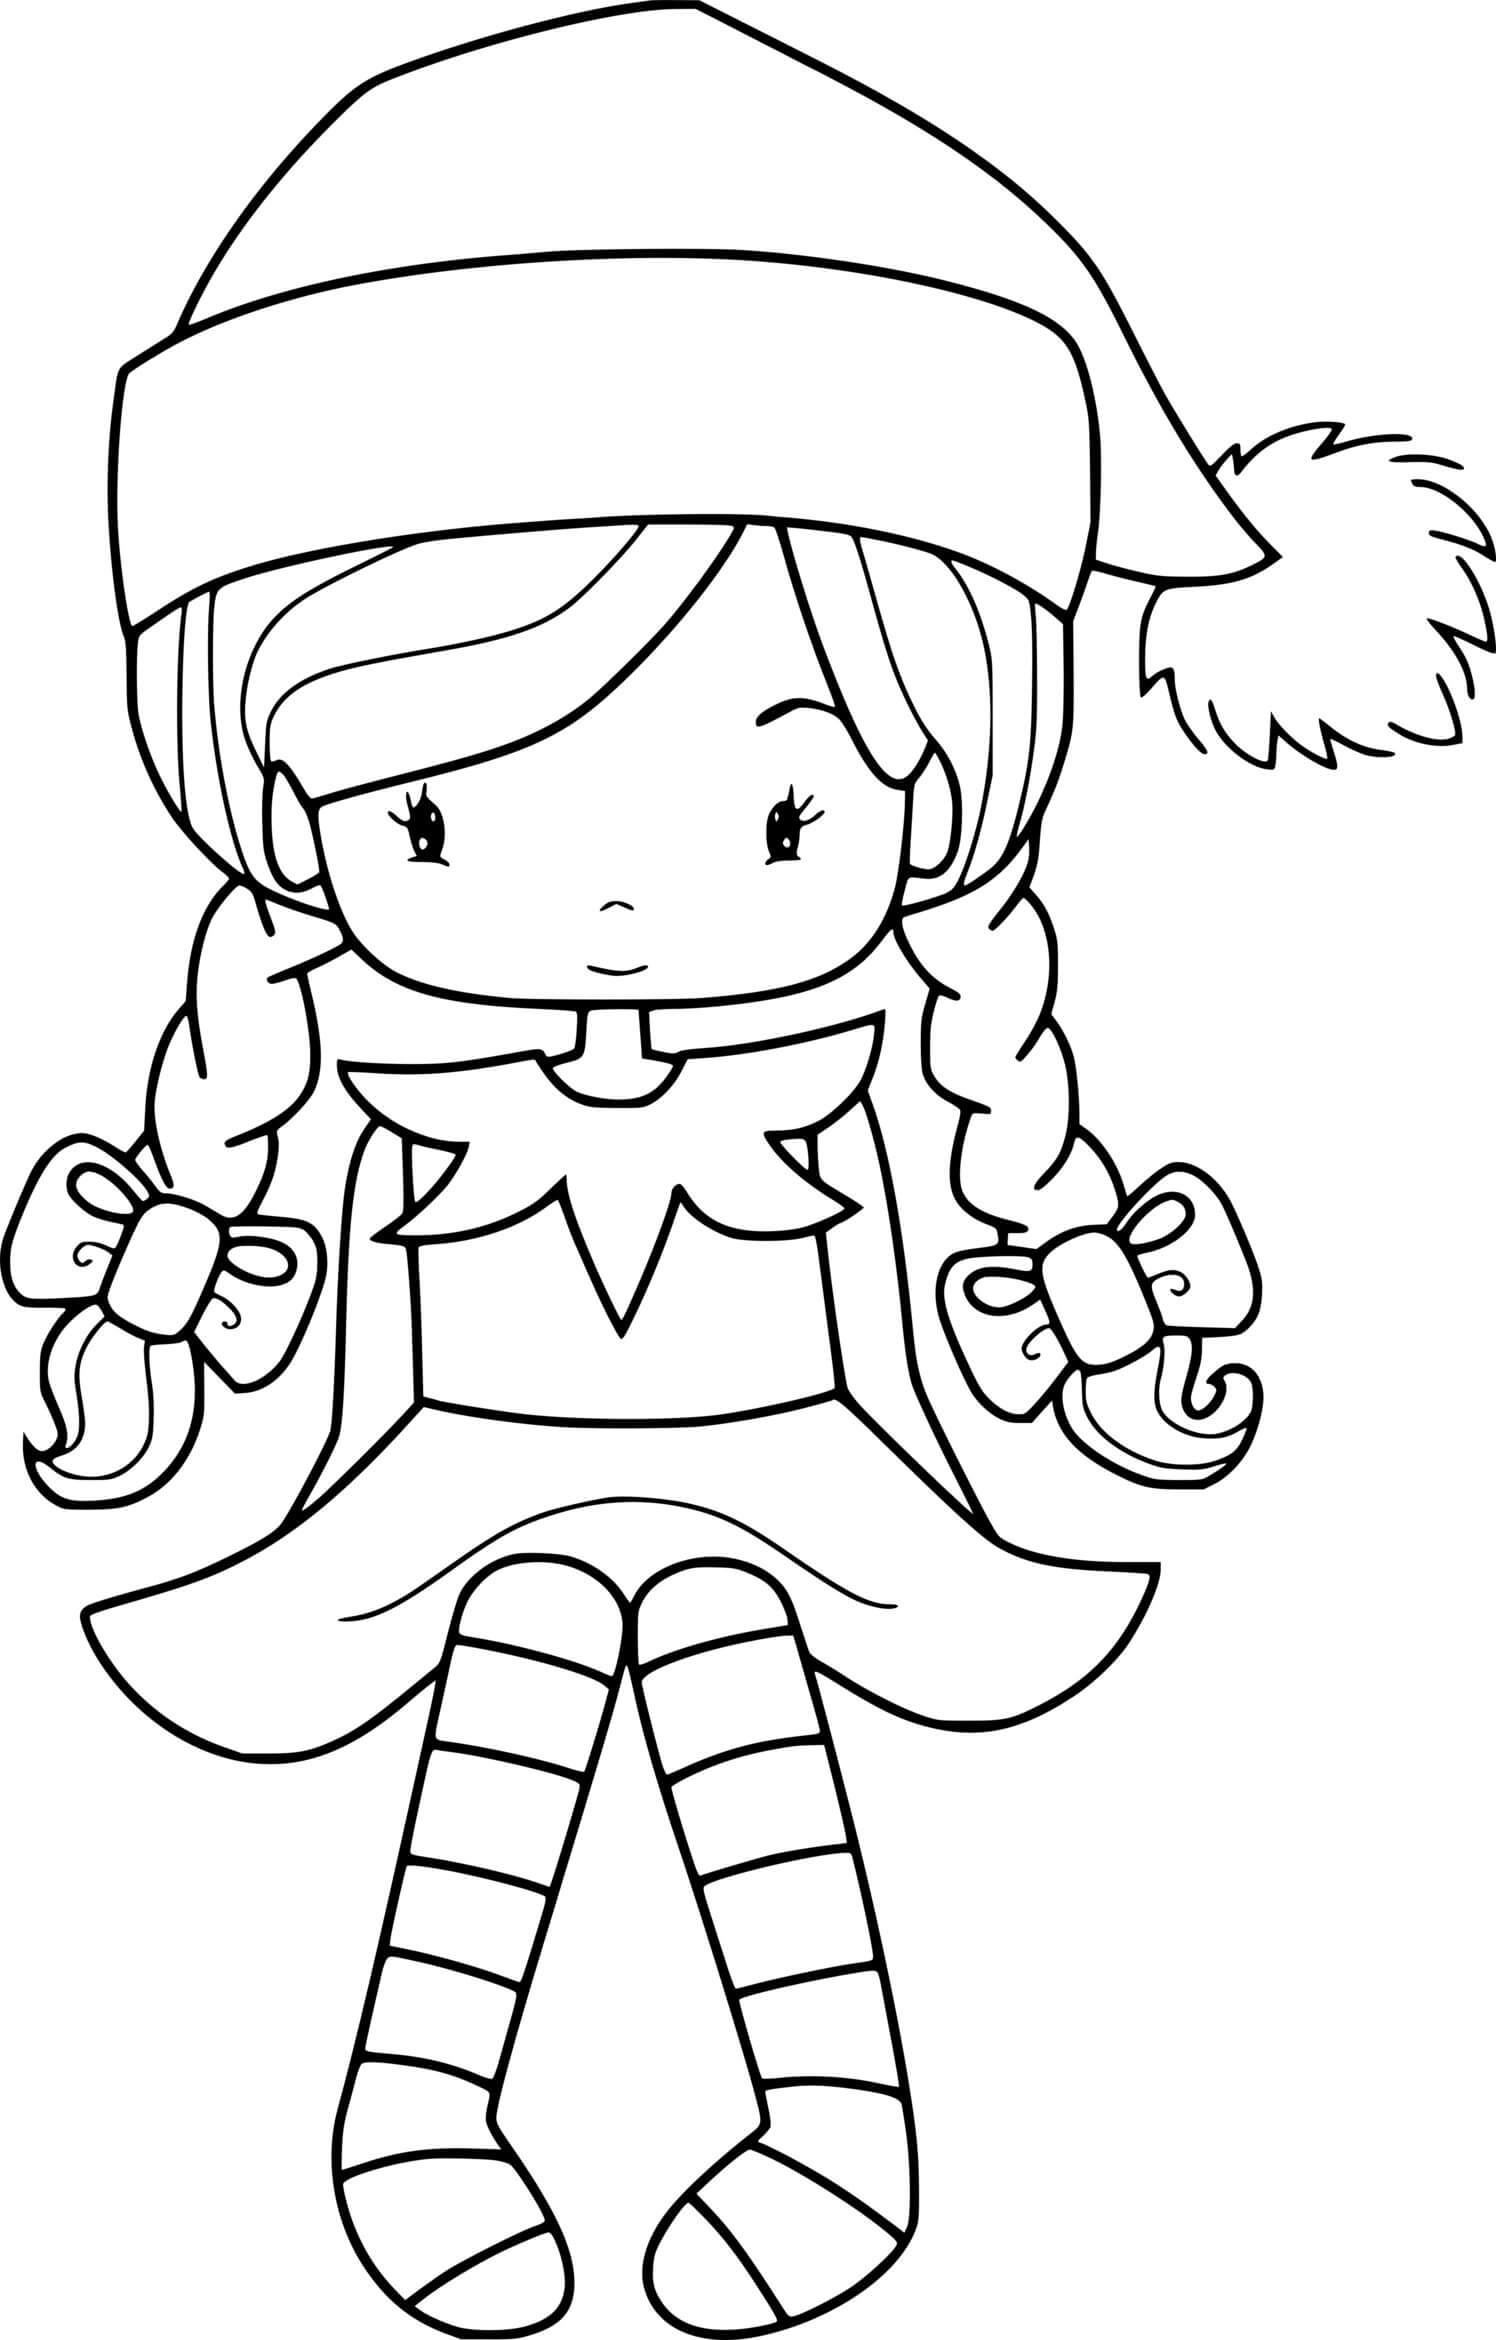 Girl Elf Sits Down Coloring Page